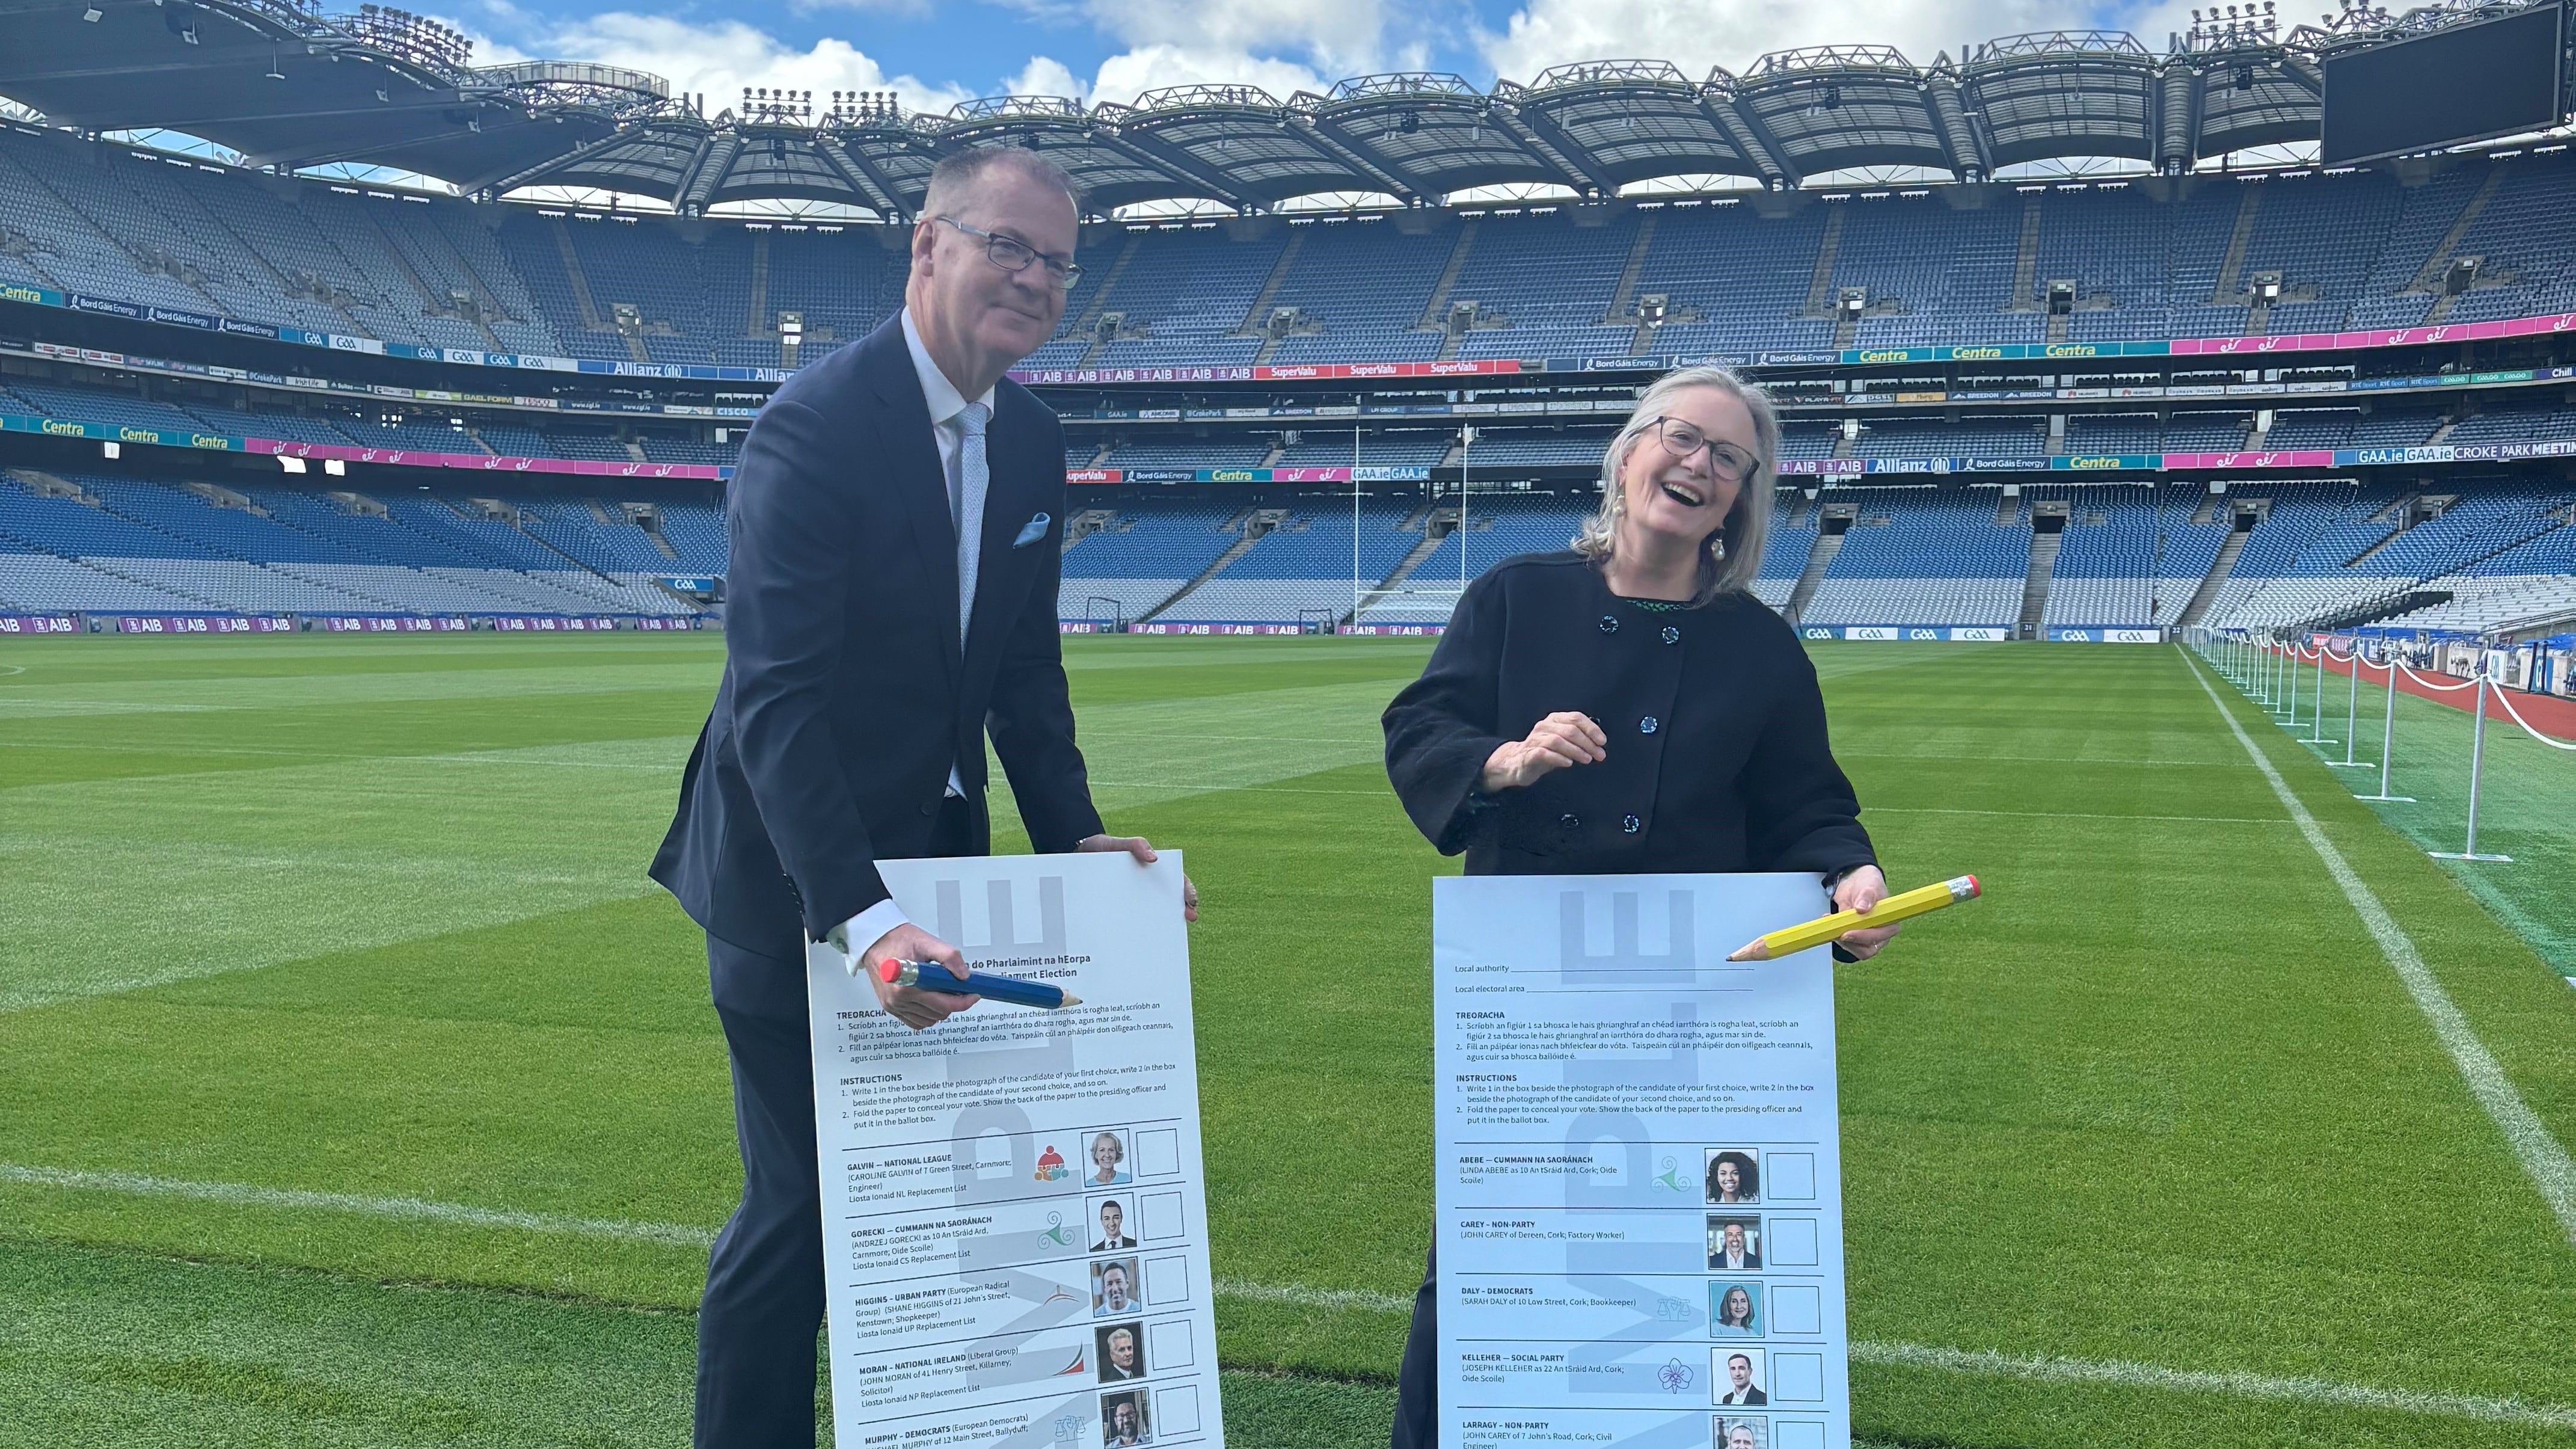 An Coimisiun Toghchain chair Ms Justice Marie Baker and chief executive Art O’Leary at Croke Park